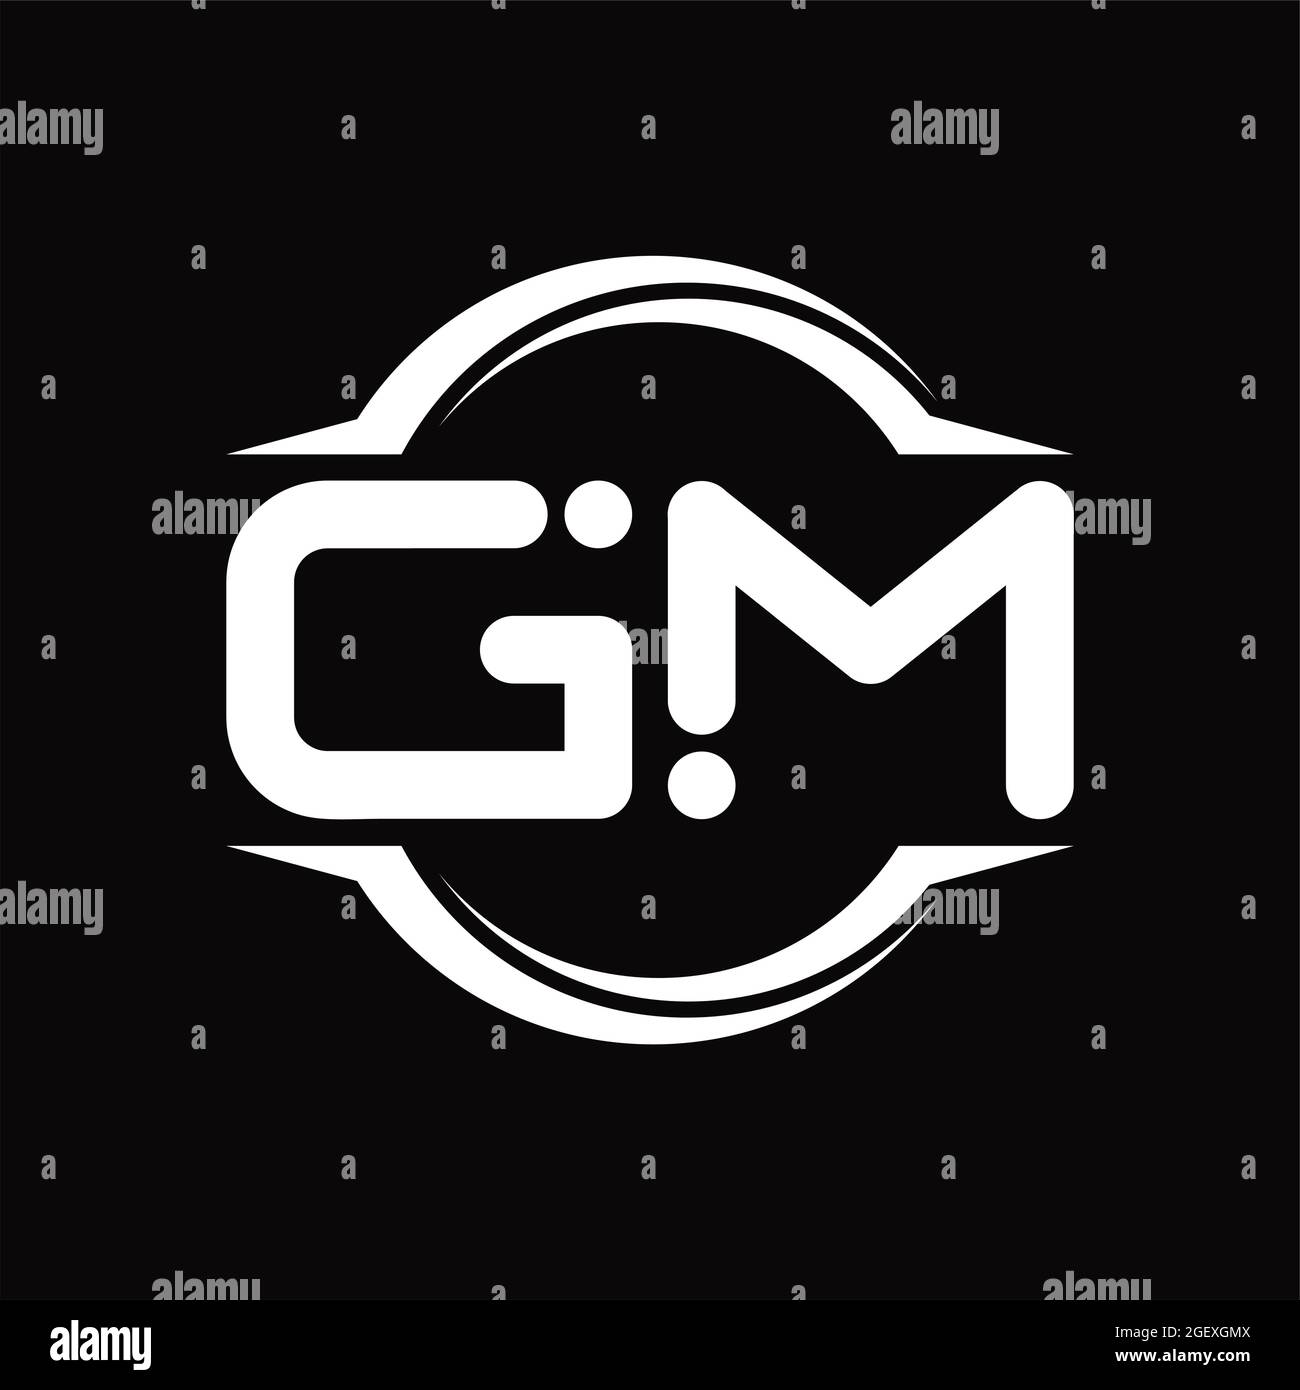 Gm Letters Stock Illustrations – 290 Gm Letters Stock